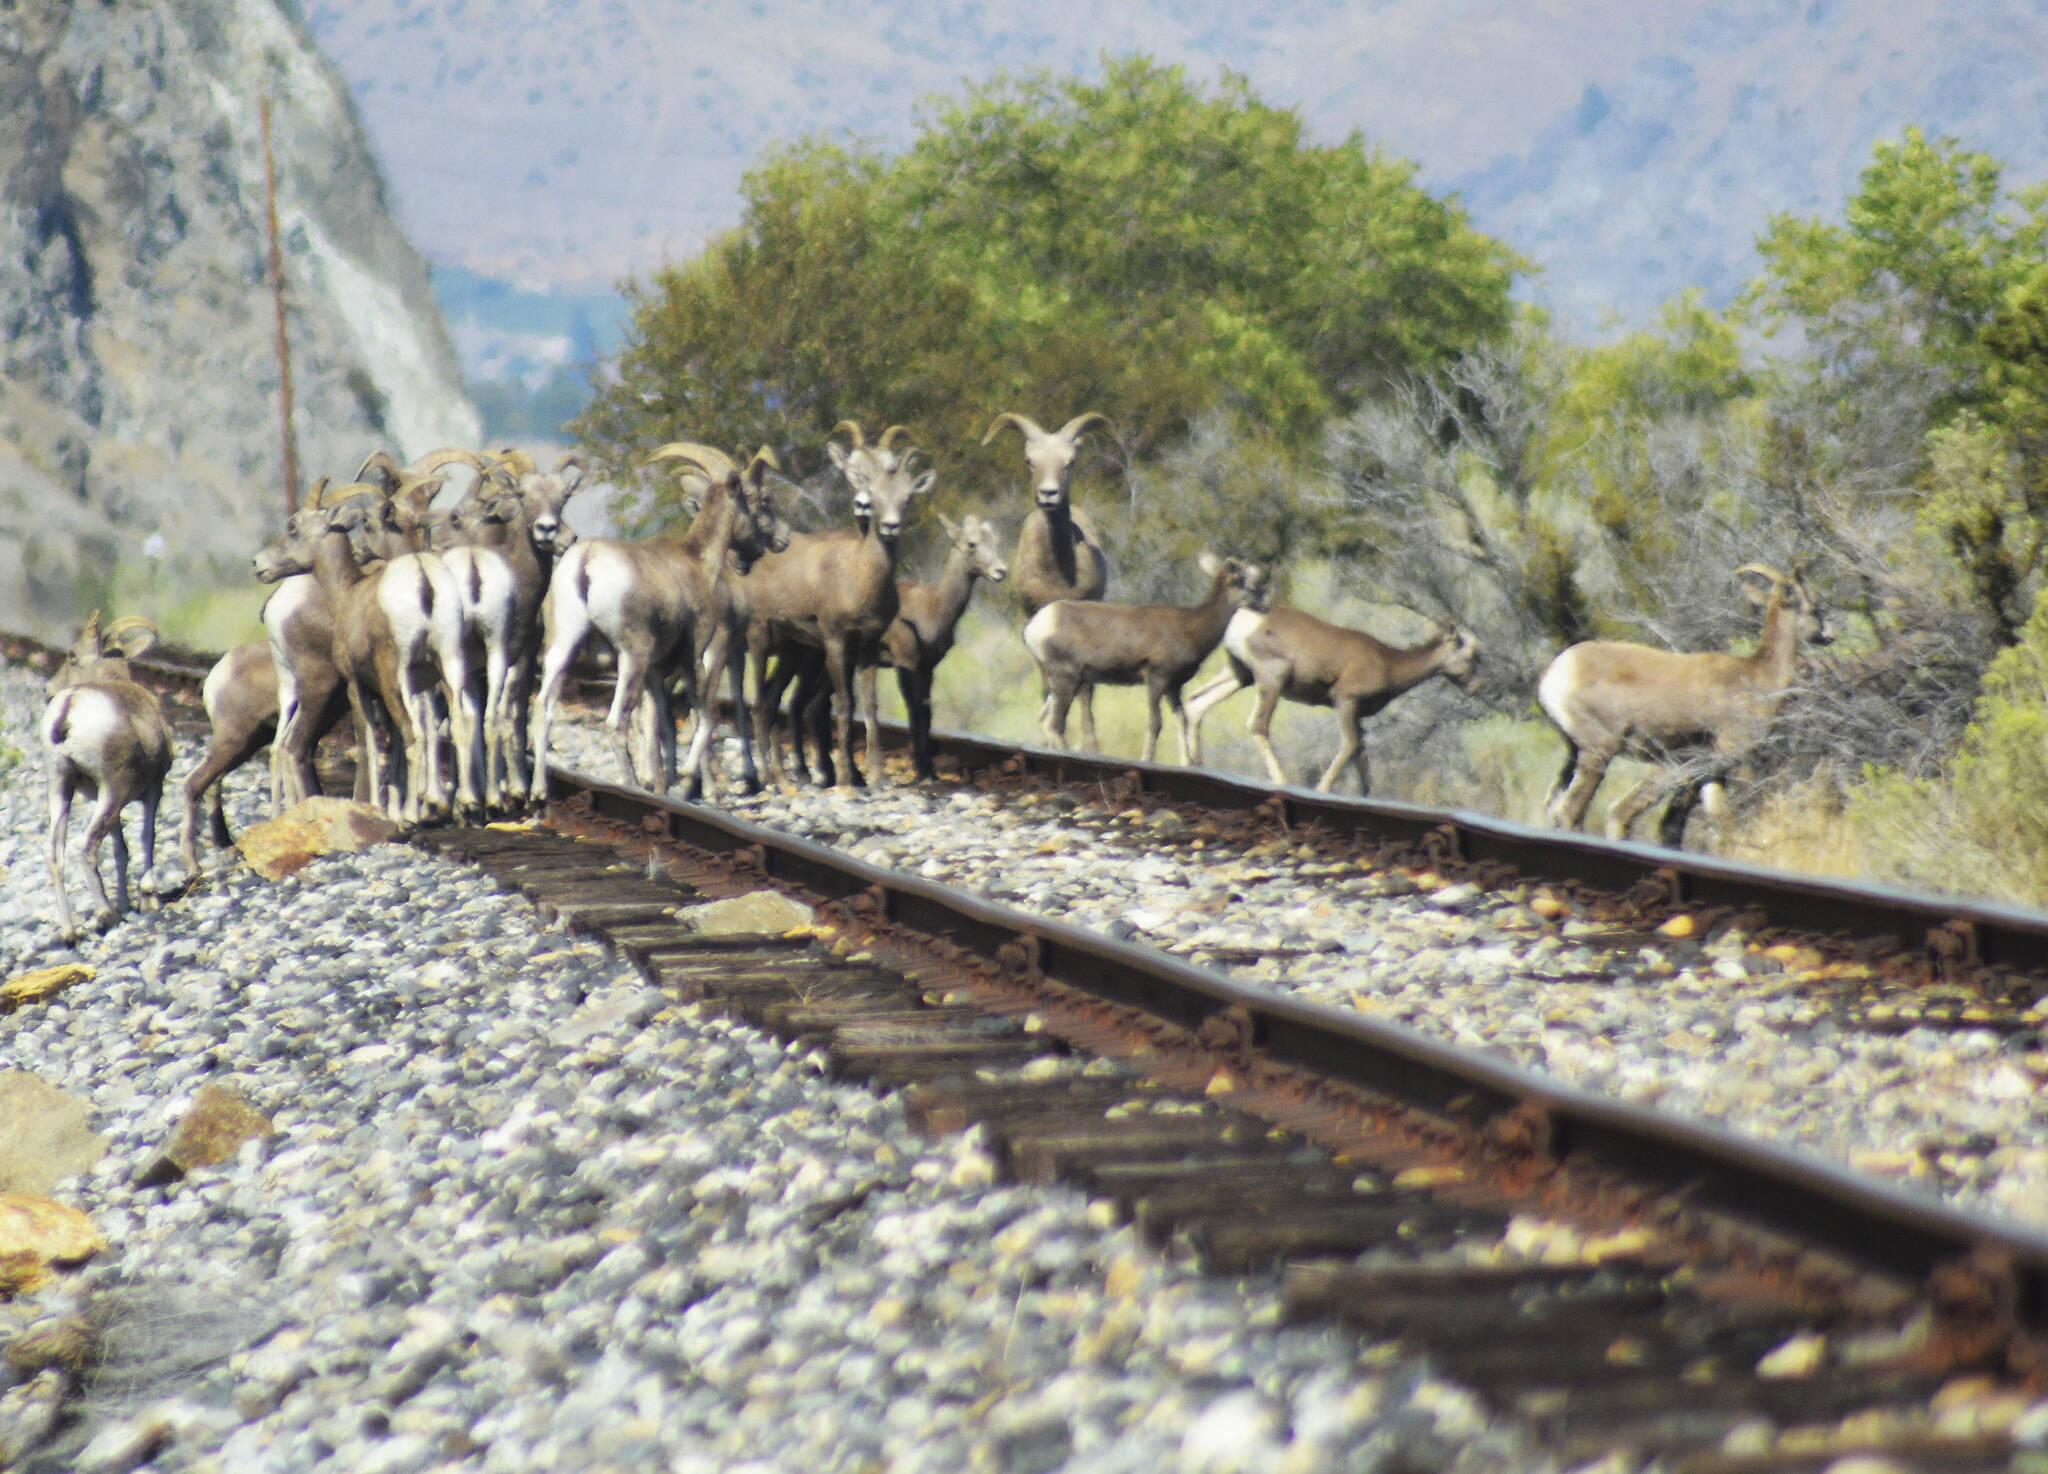 Bullhorn sheep hang out on railroad tracks after drinking water from the lake.